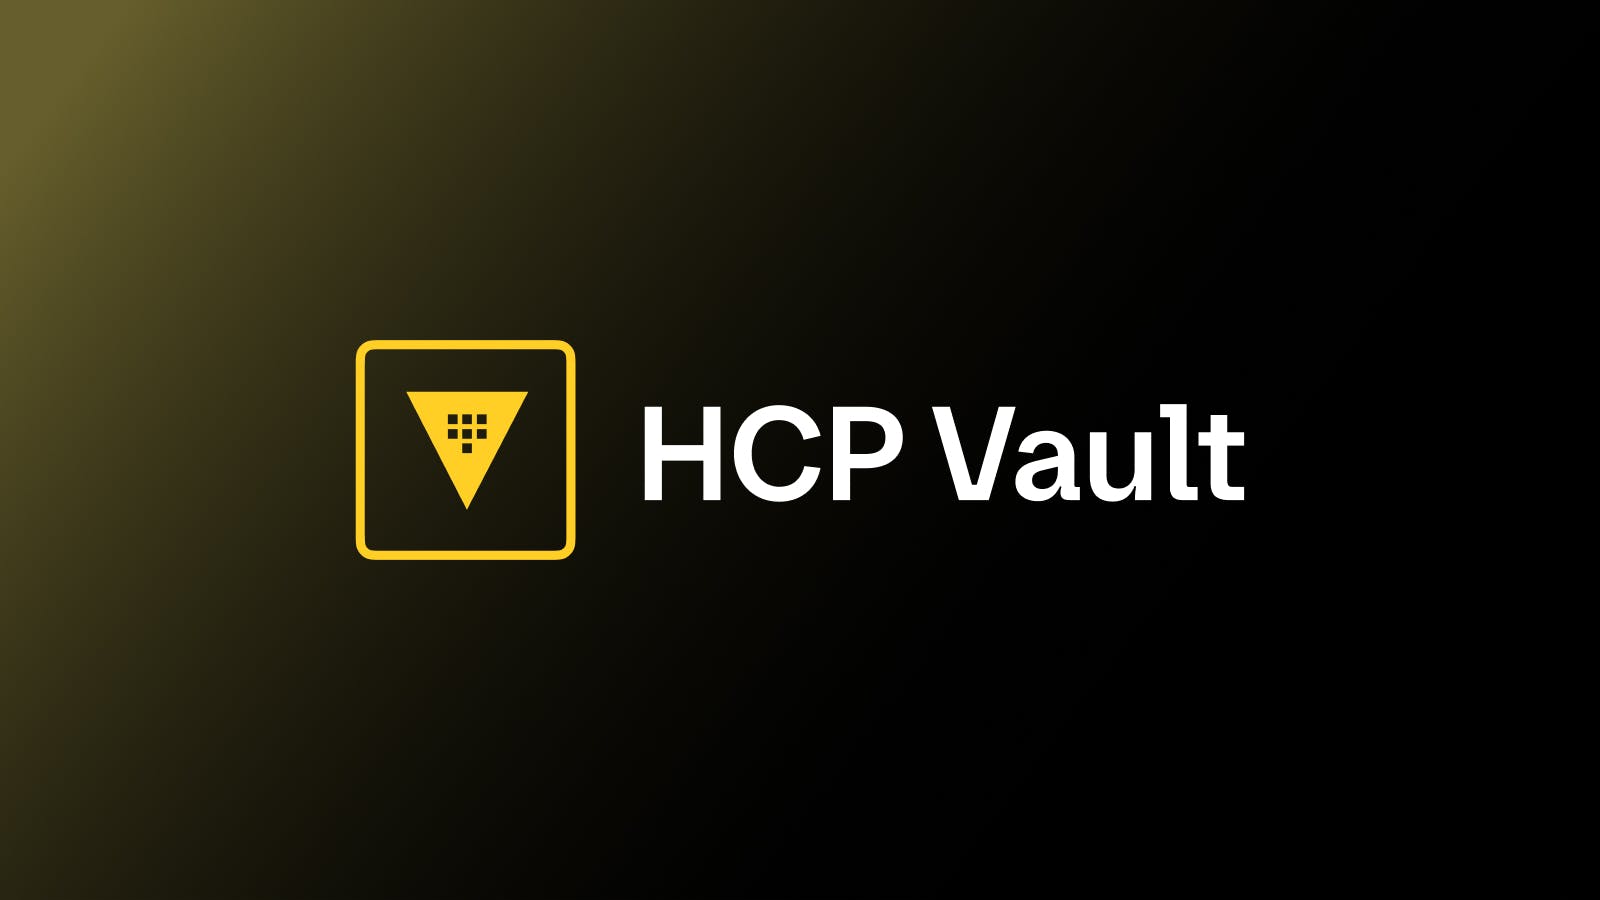 HCP Vault adds 3 new observability integrations and HTTP streaming